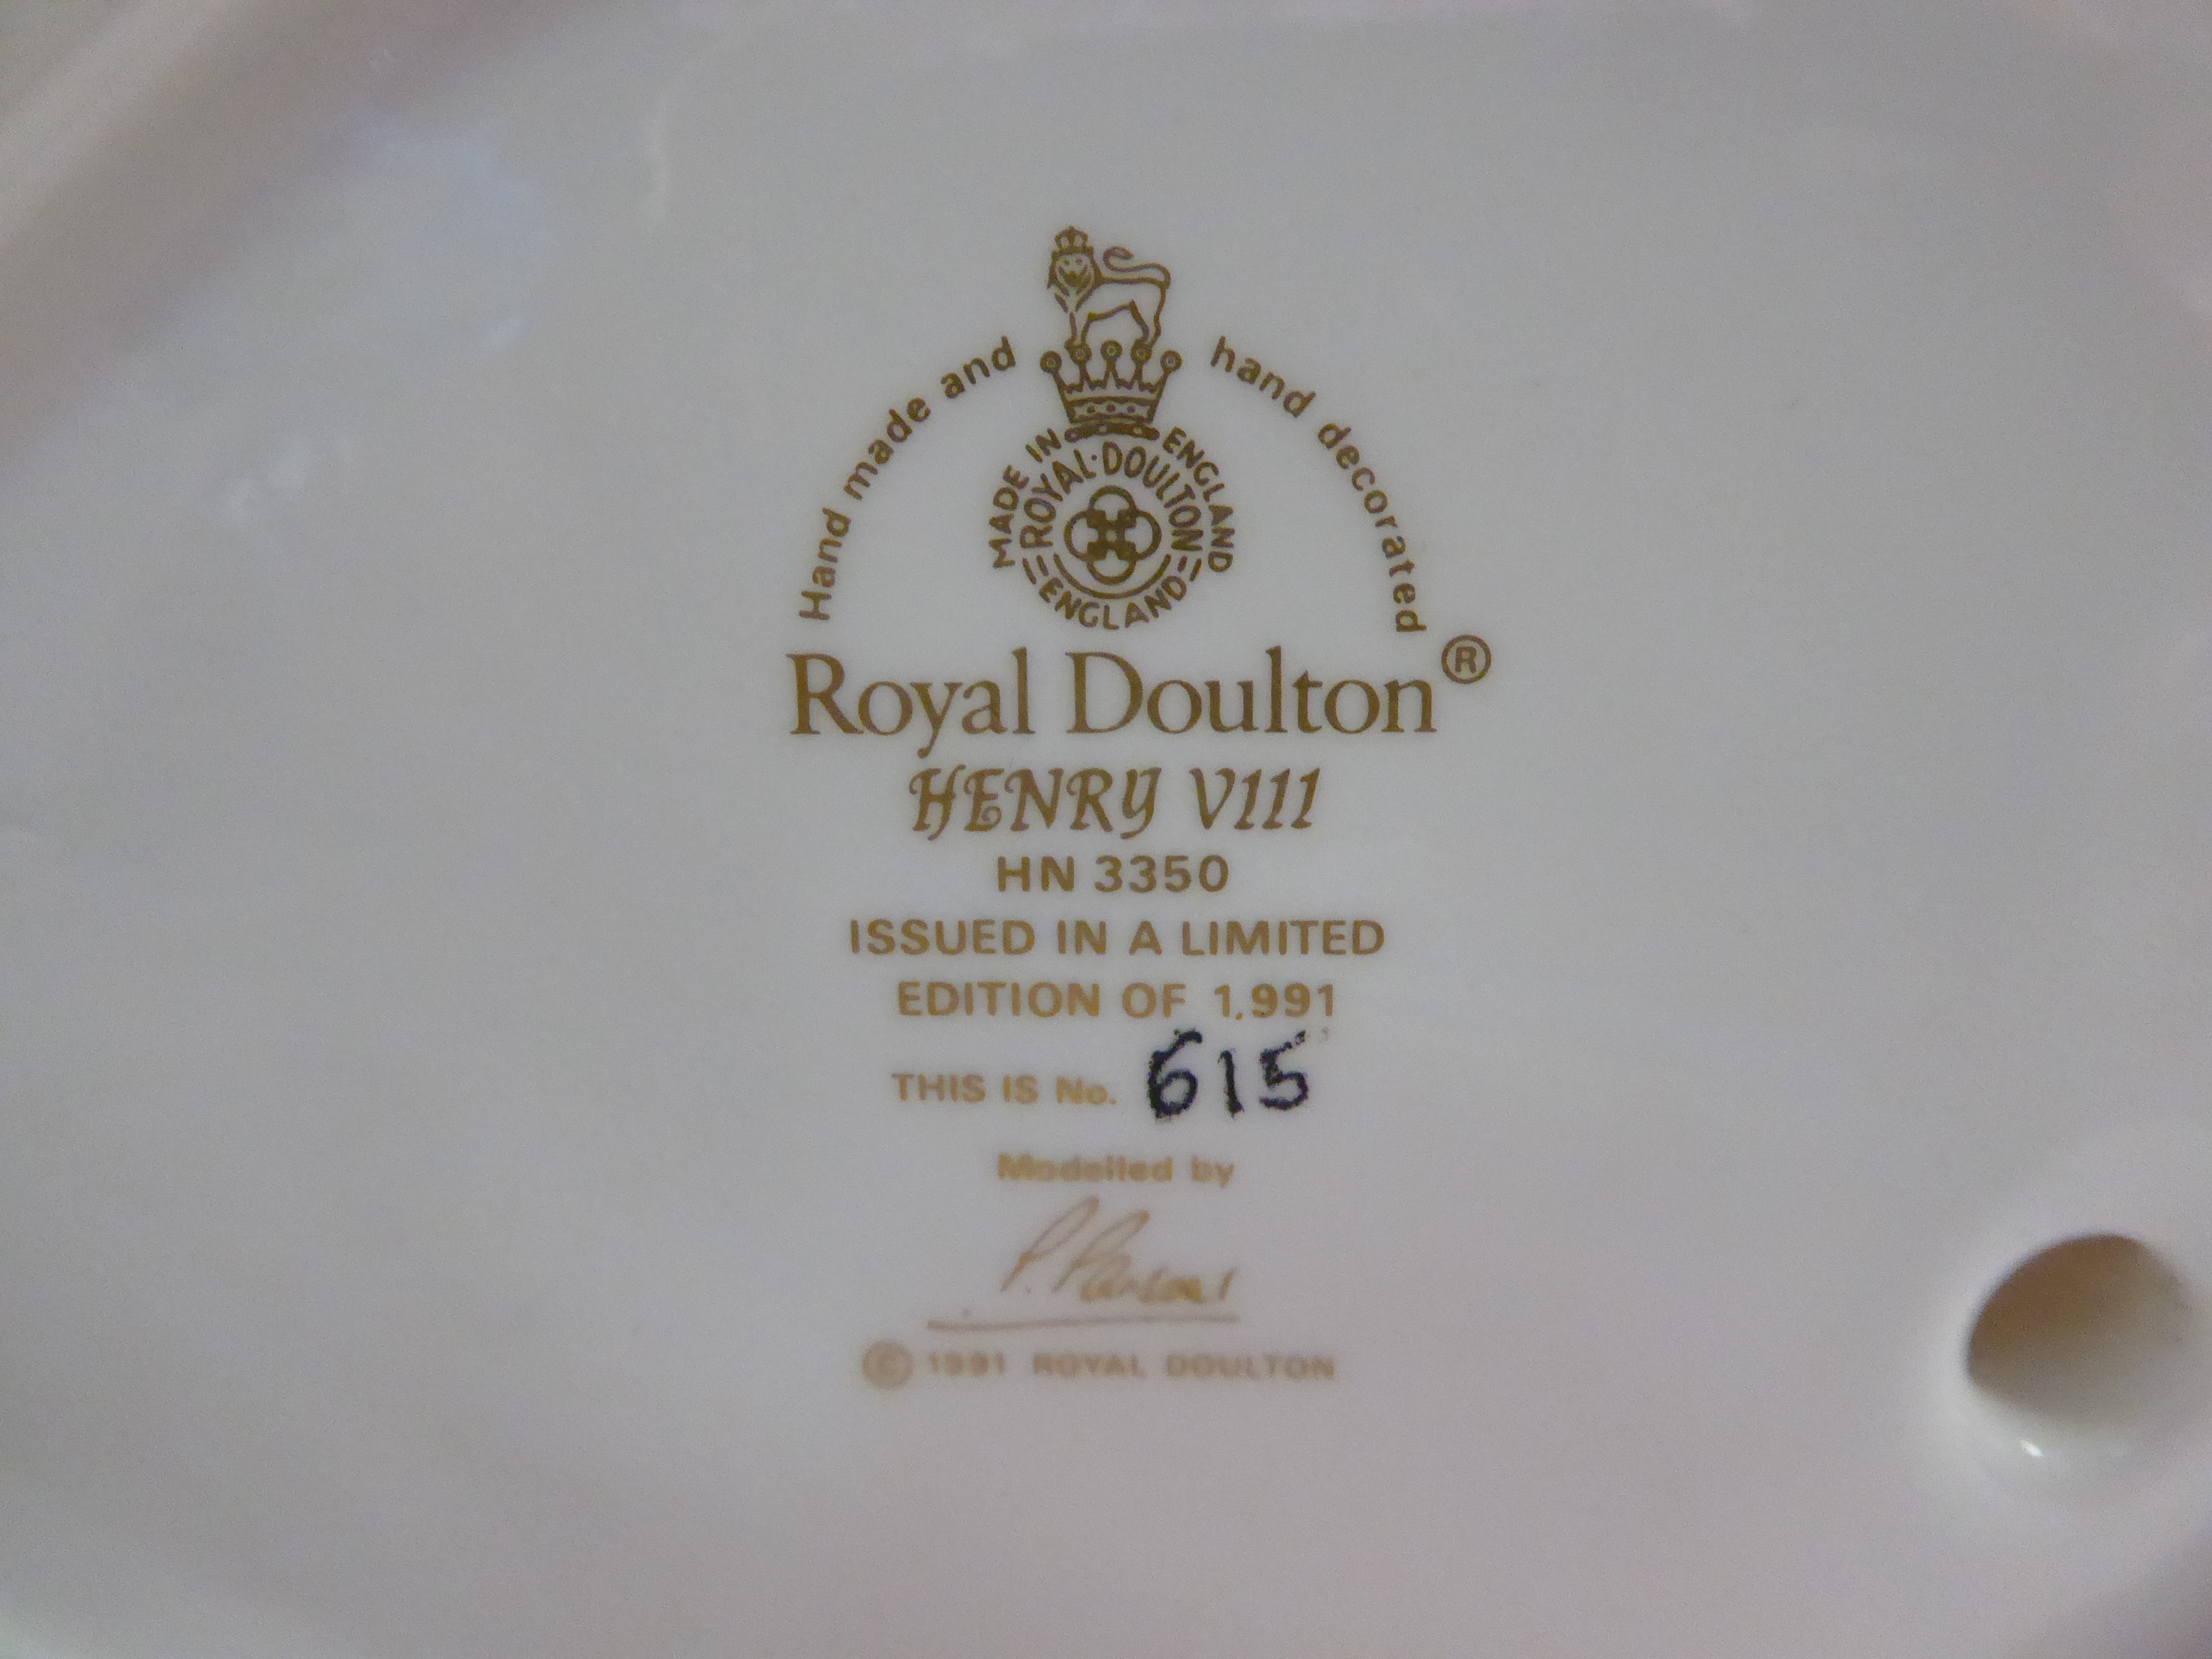 A Royal Doulton Limited Edition set of china figures, comprising Henry VIII and his six wives, - Image 9 of 9